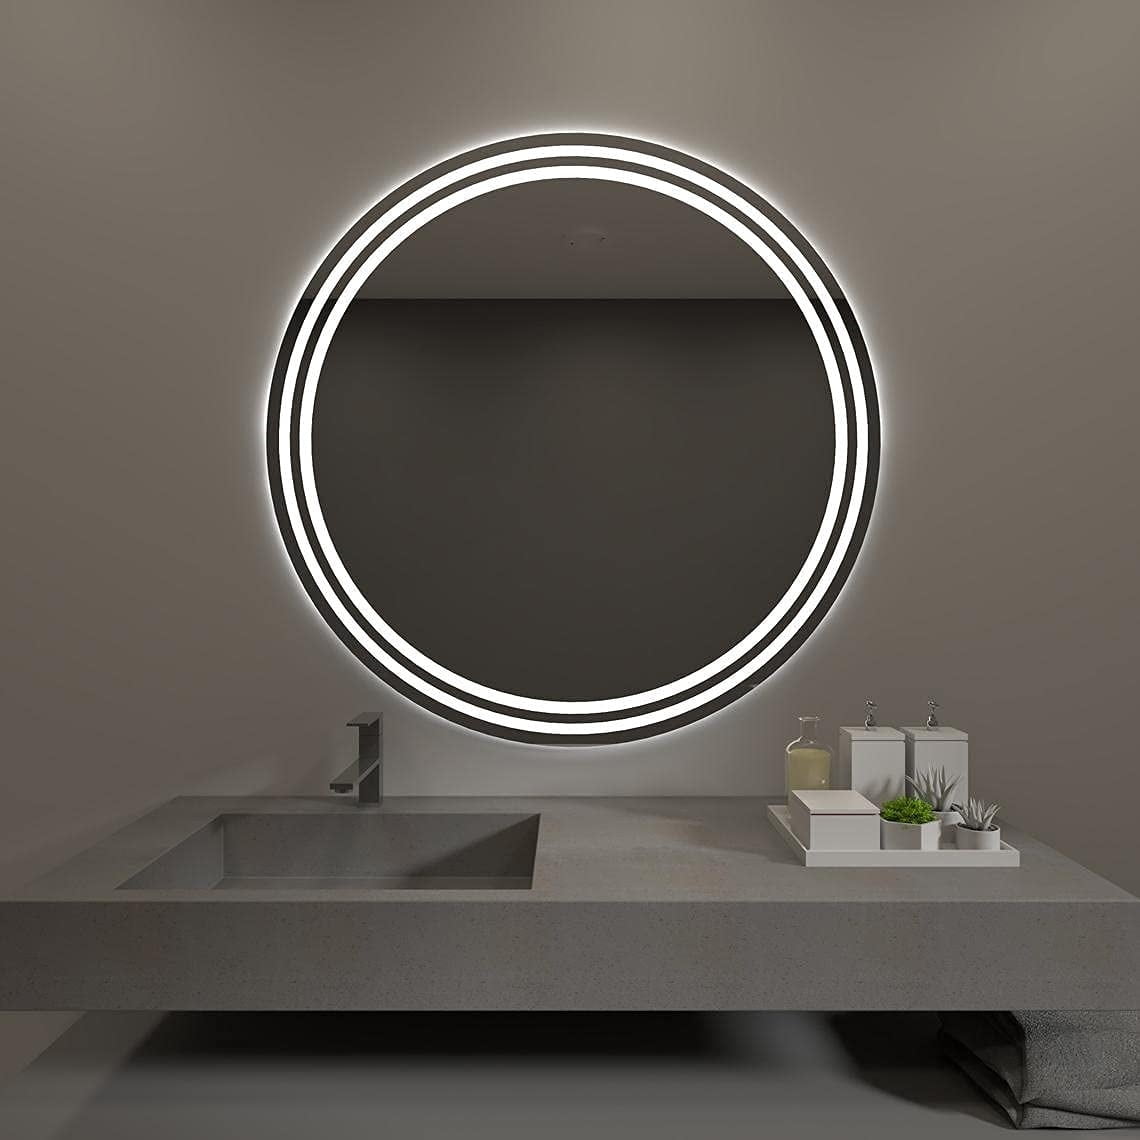 Rounded Smart LED Mirror with Sensor Lights -Sehrawat Brothers- My Interior Factory